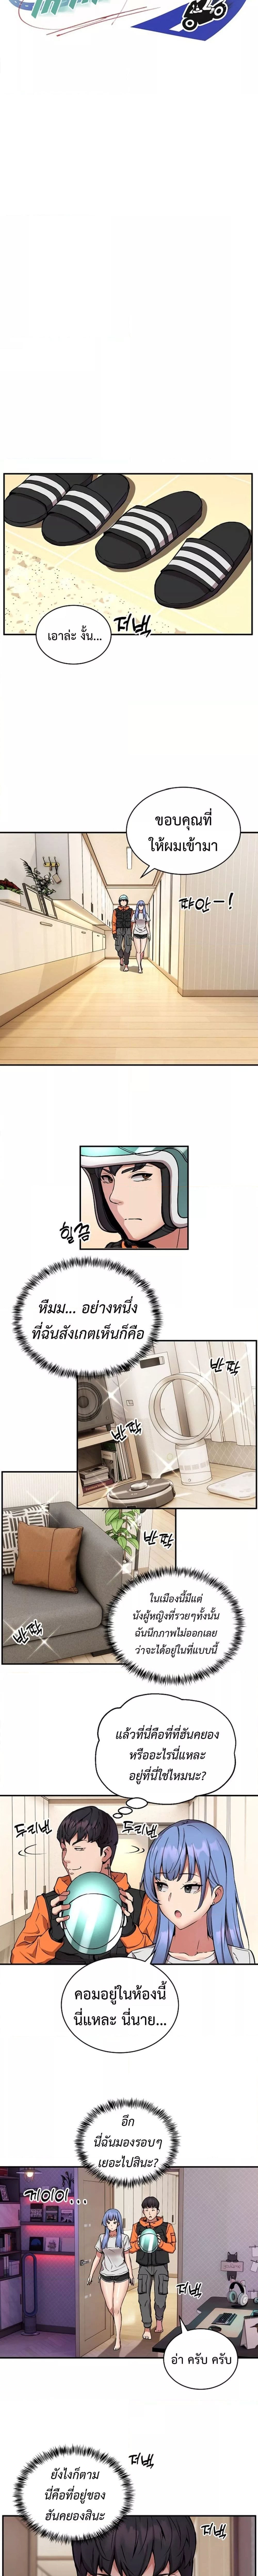 Driver in the New City ตอนที่ 12 ภาพ 1